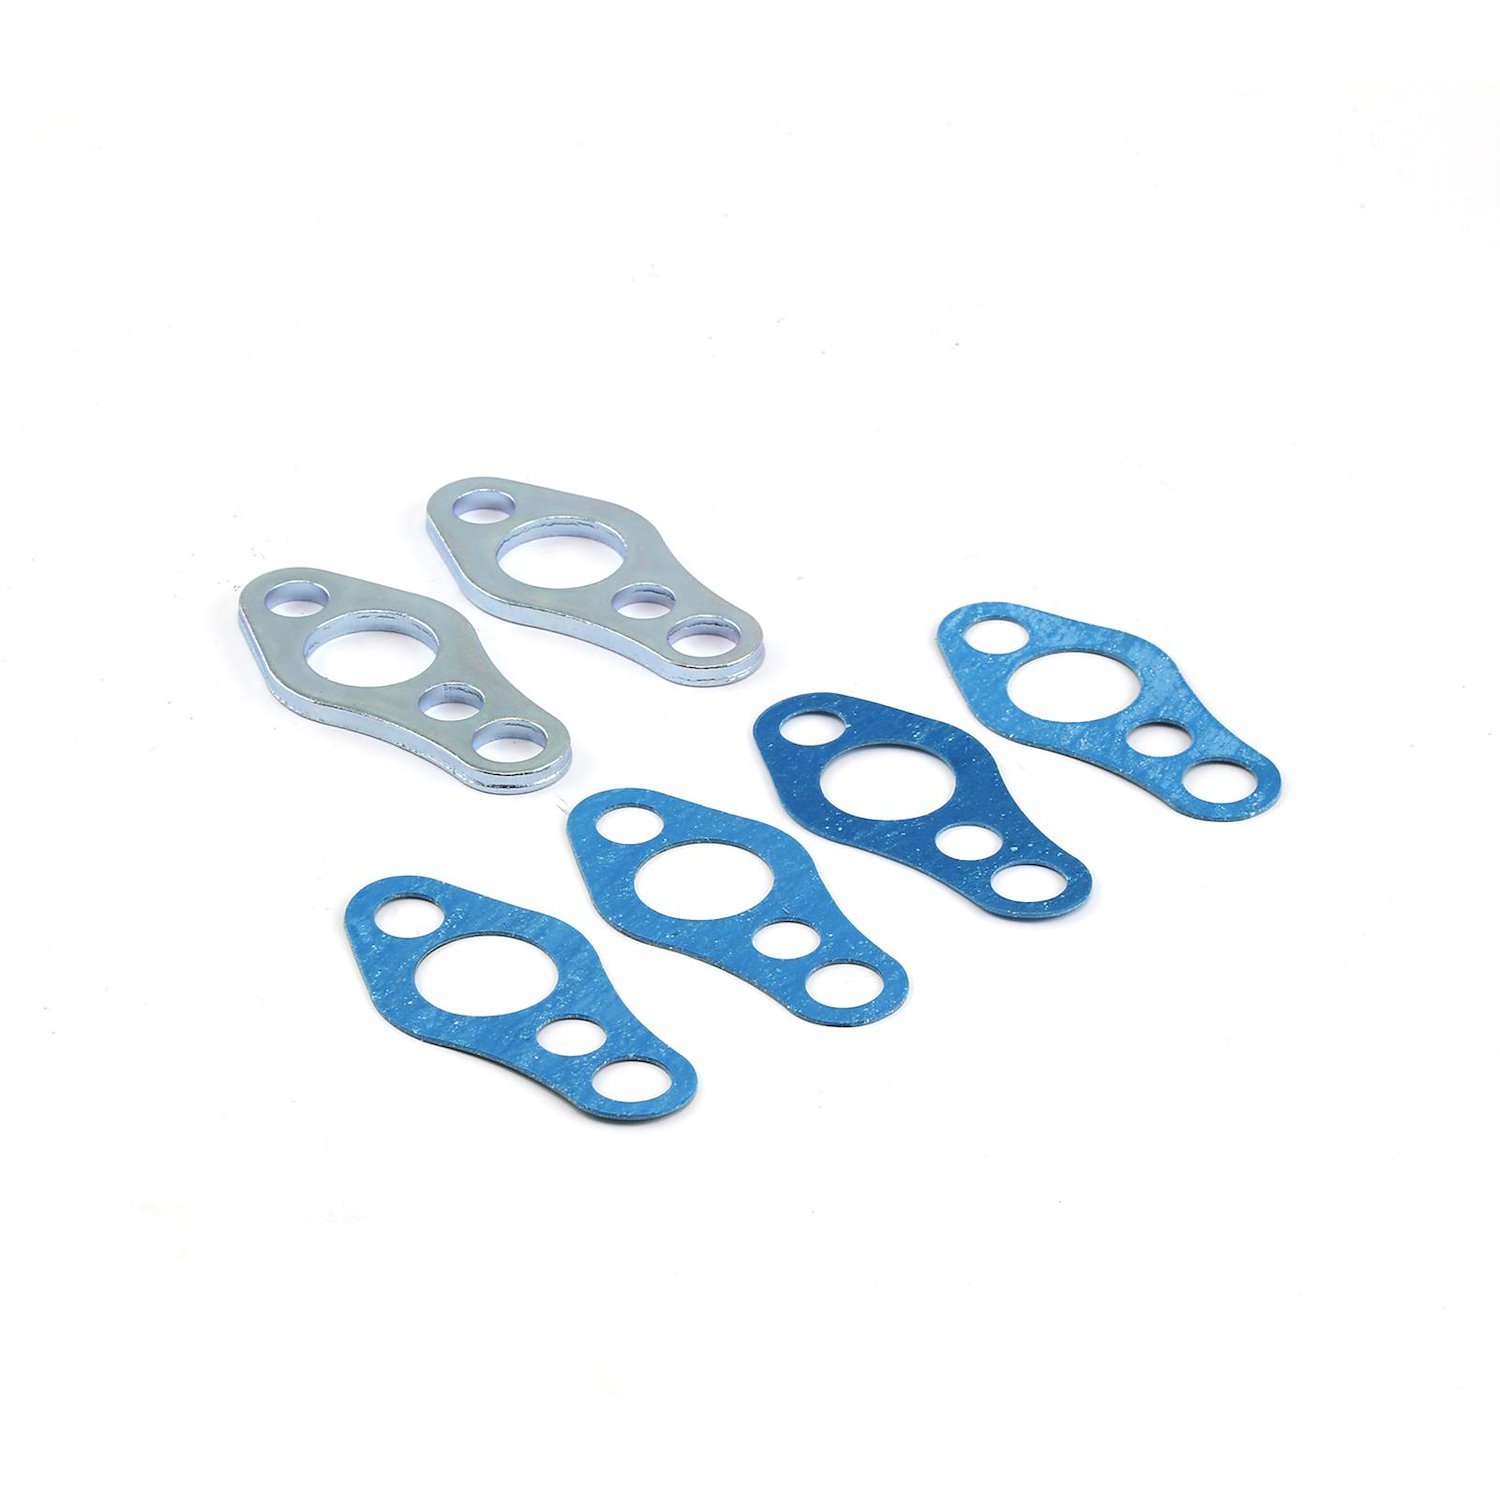 Chevy SBC Short Water Pump Leg Spacer Kit With Gaskets 1/8 Thick